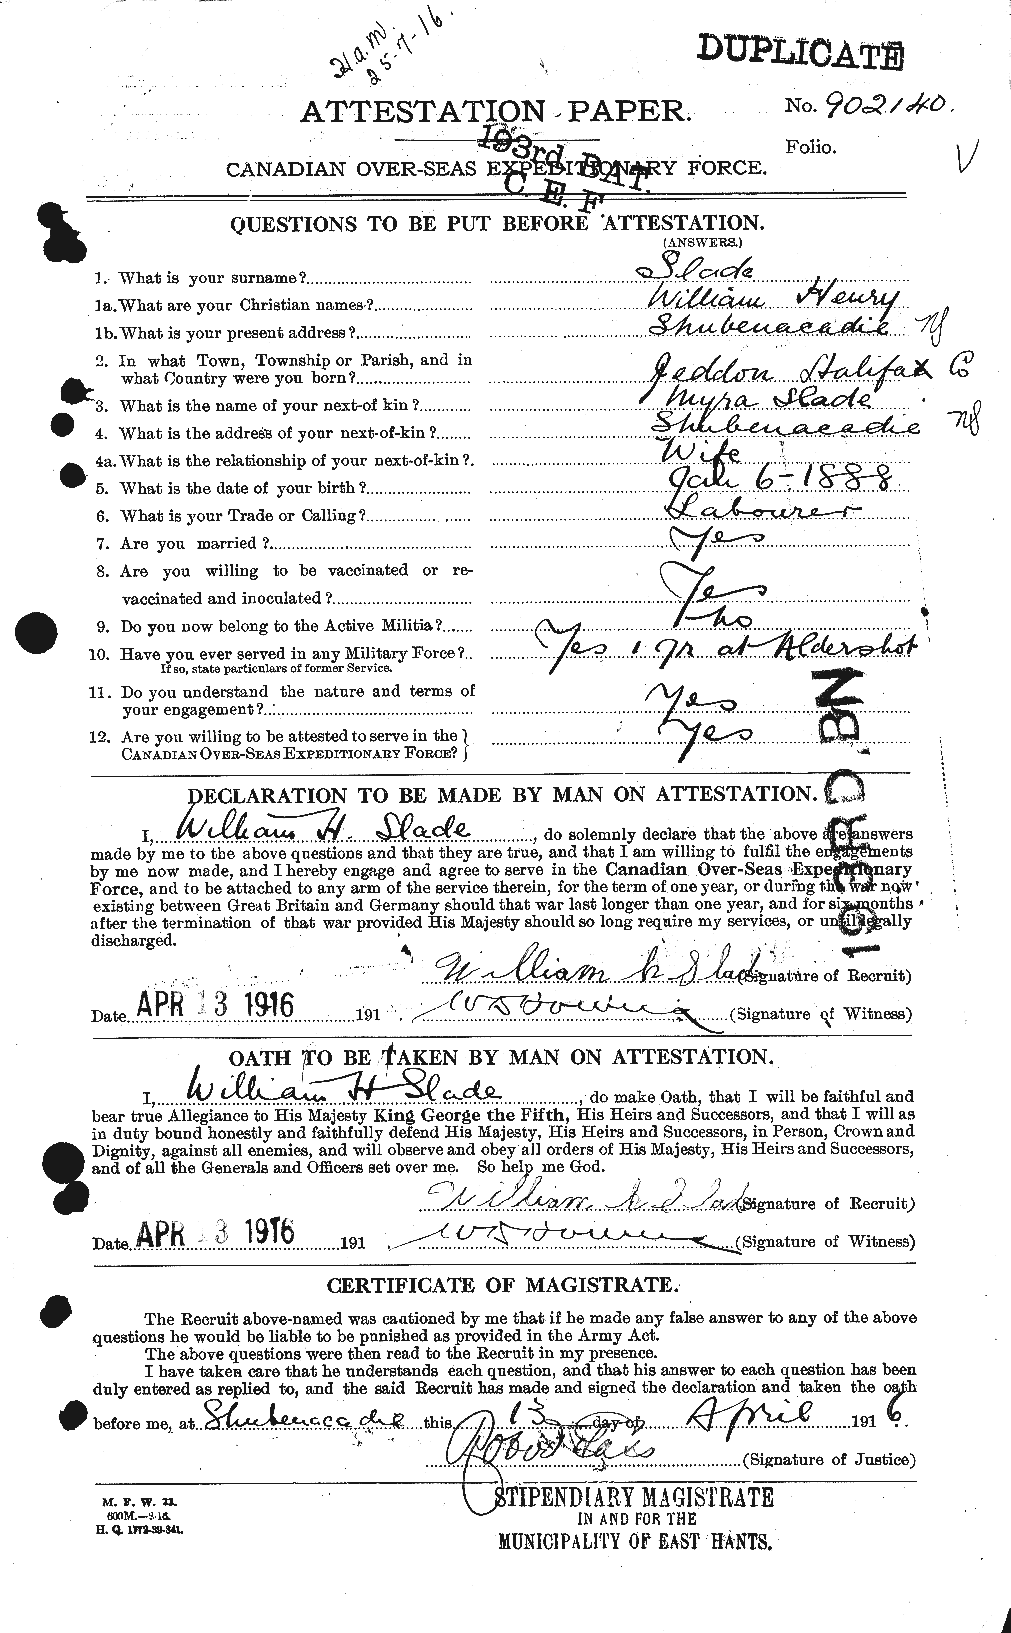 Personnel Records of the First World War - CEF 103551a